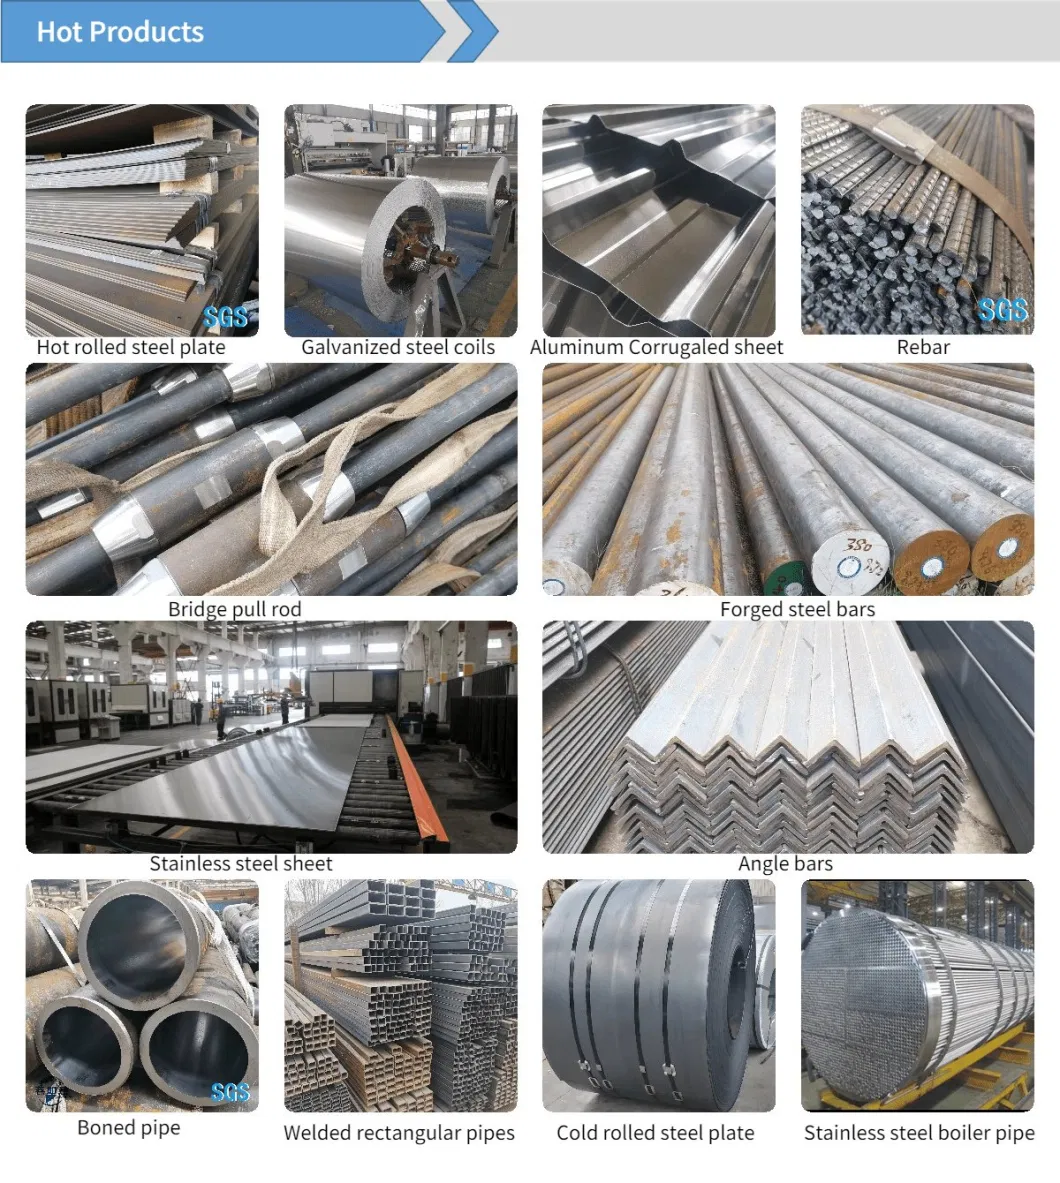 EMT Heavy Thick Wall Welded Pipe Galvanized Steel Tube Hot / Cold Rolling Extremely Big Size Welding Steel Pipe